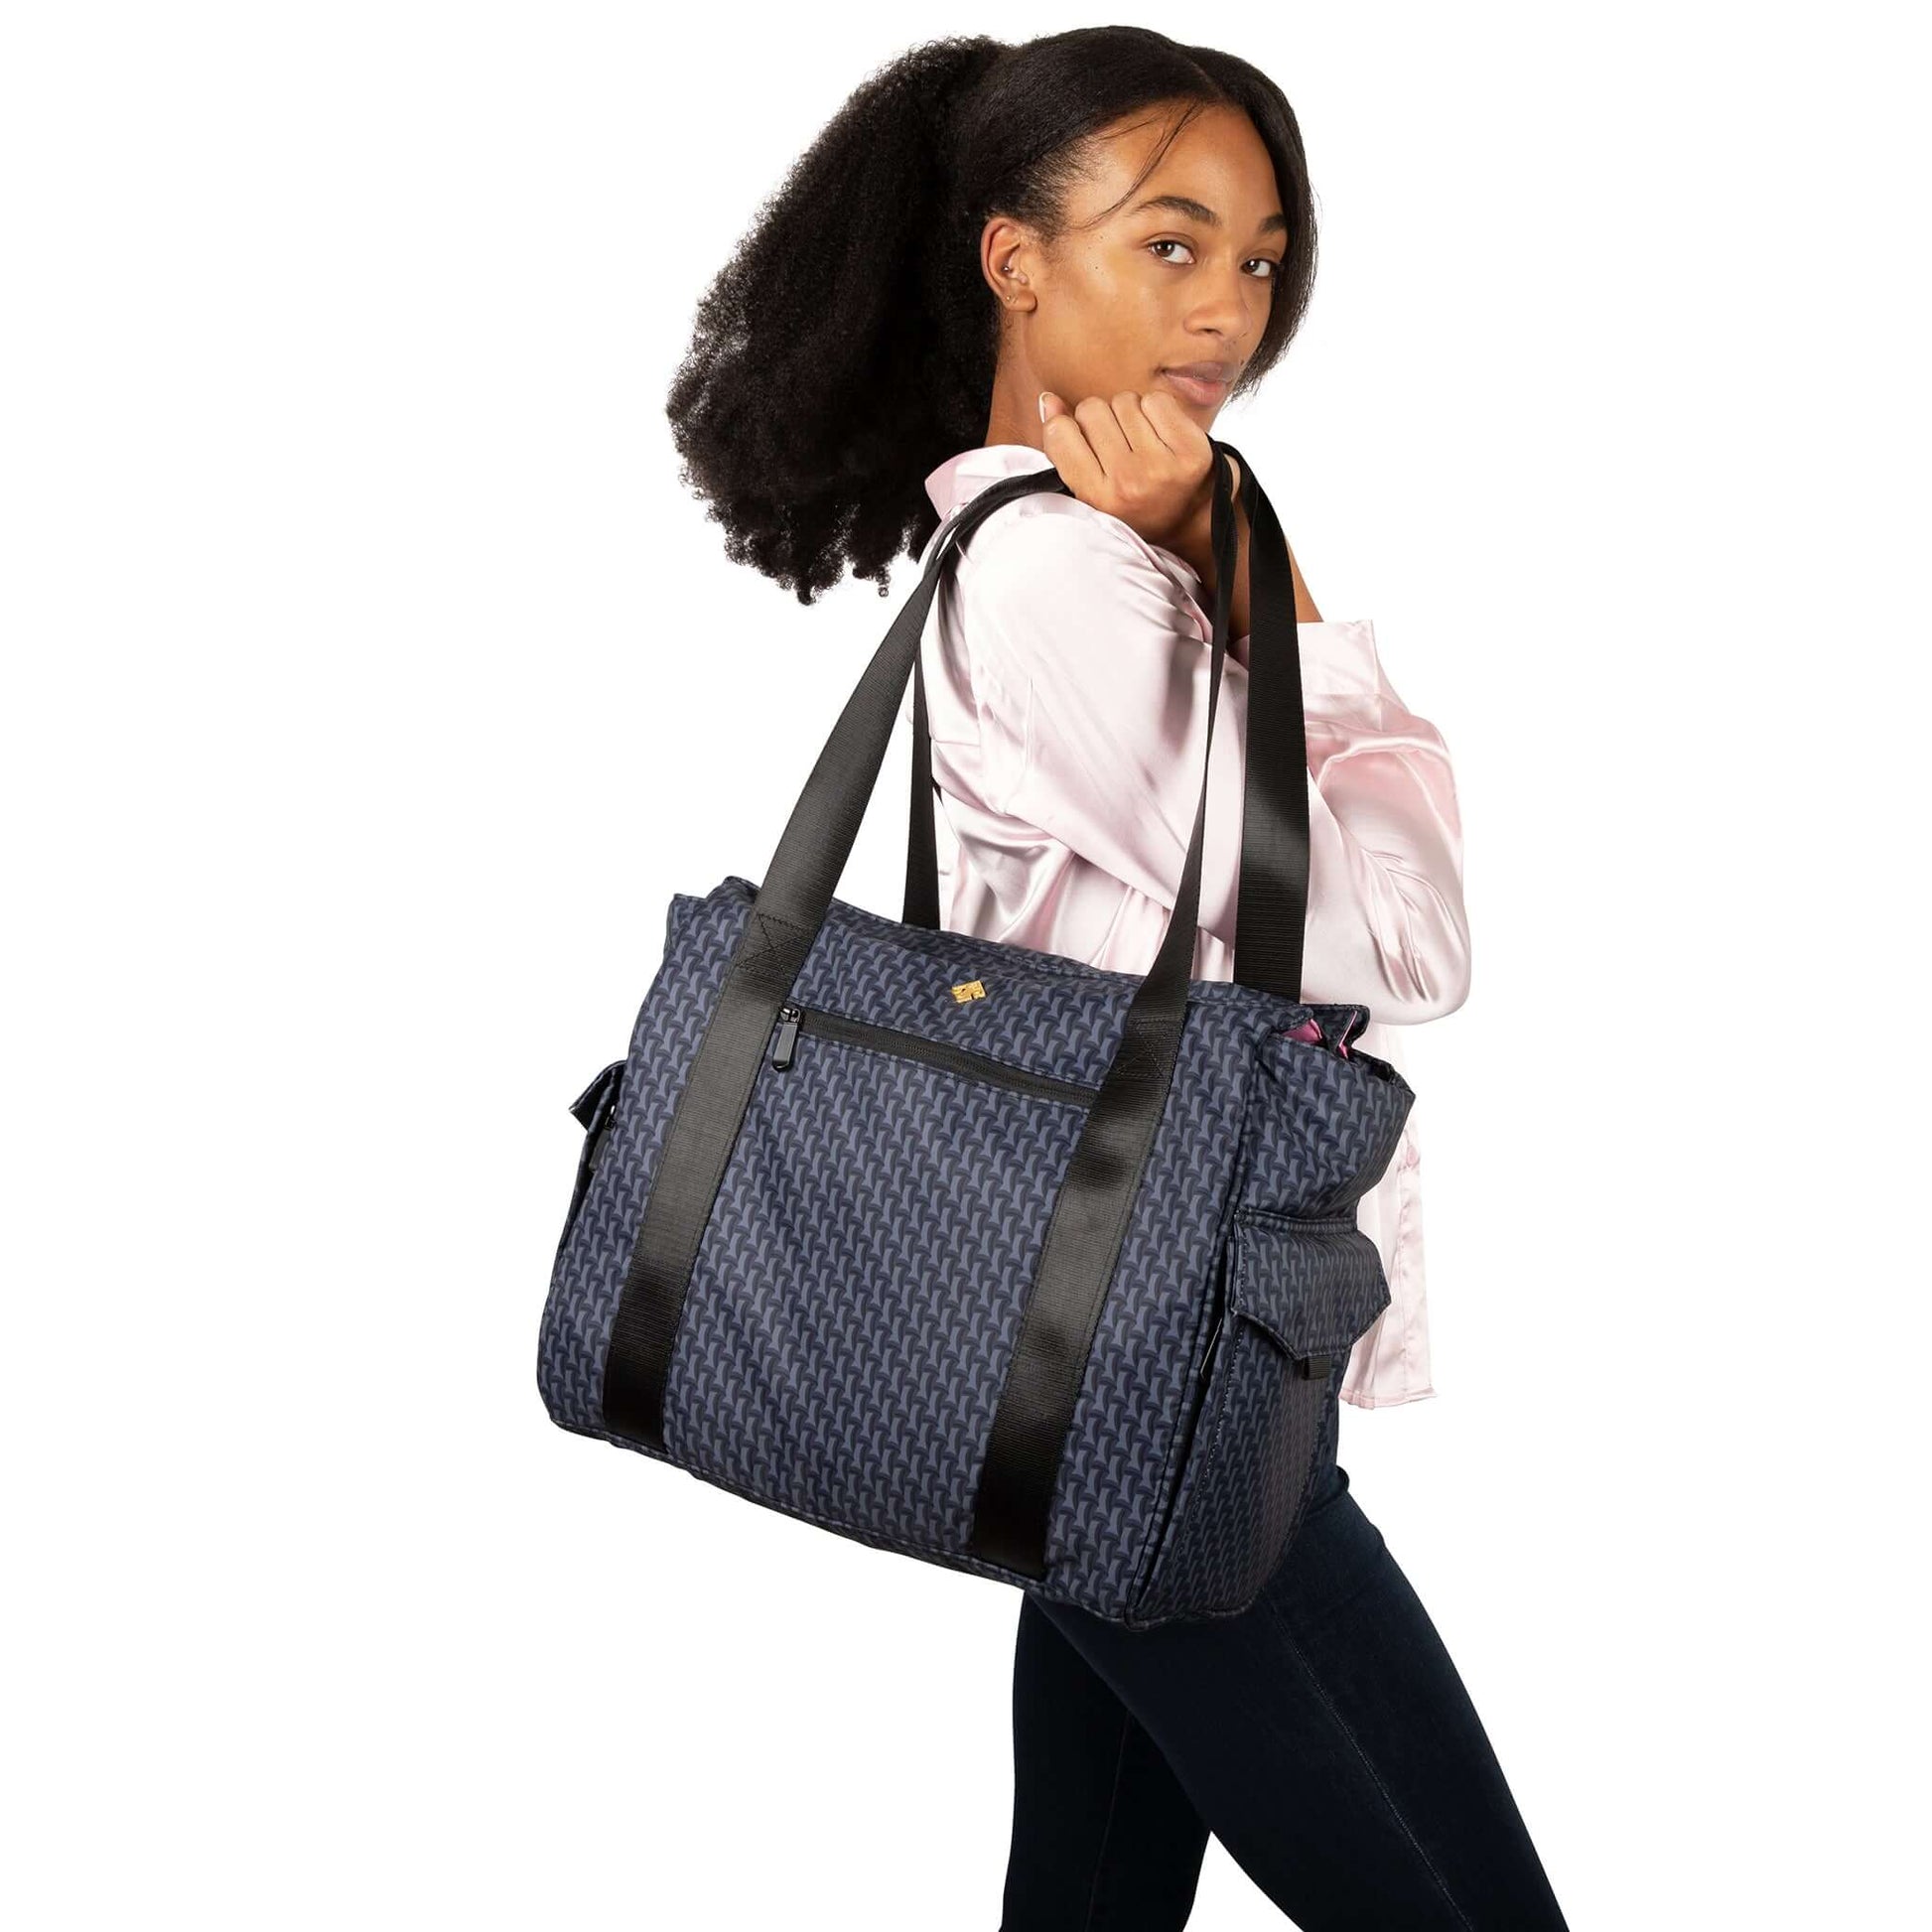 boss mom proudly carries her ellerby tote bag on her shoulder